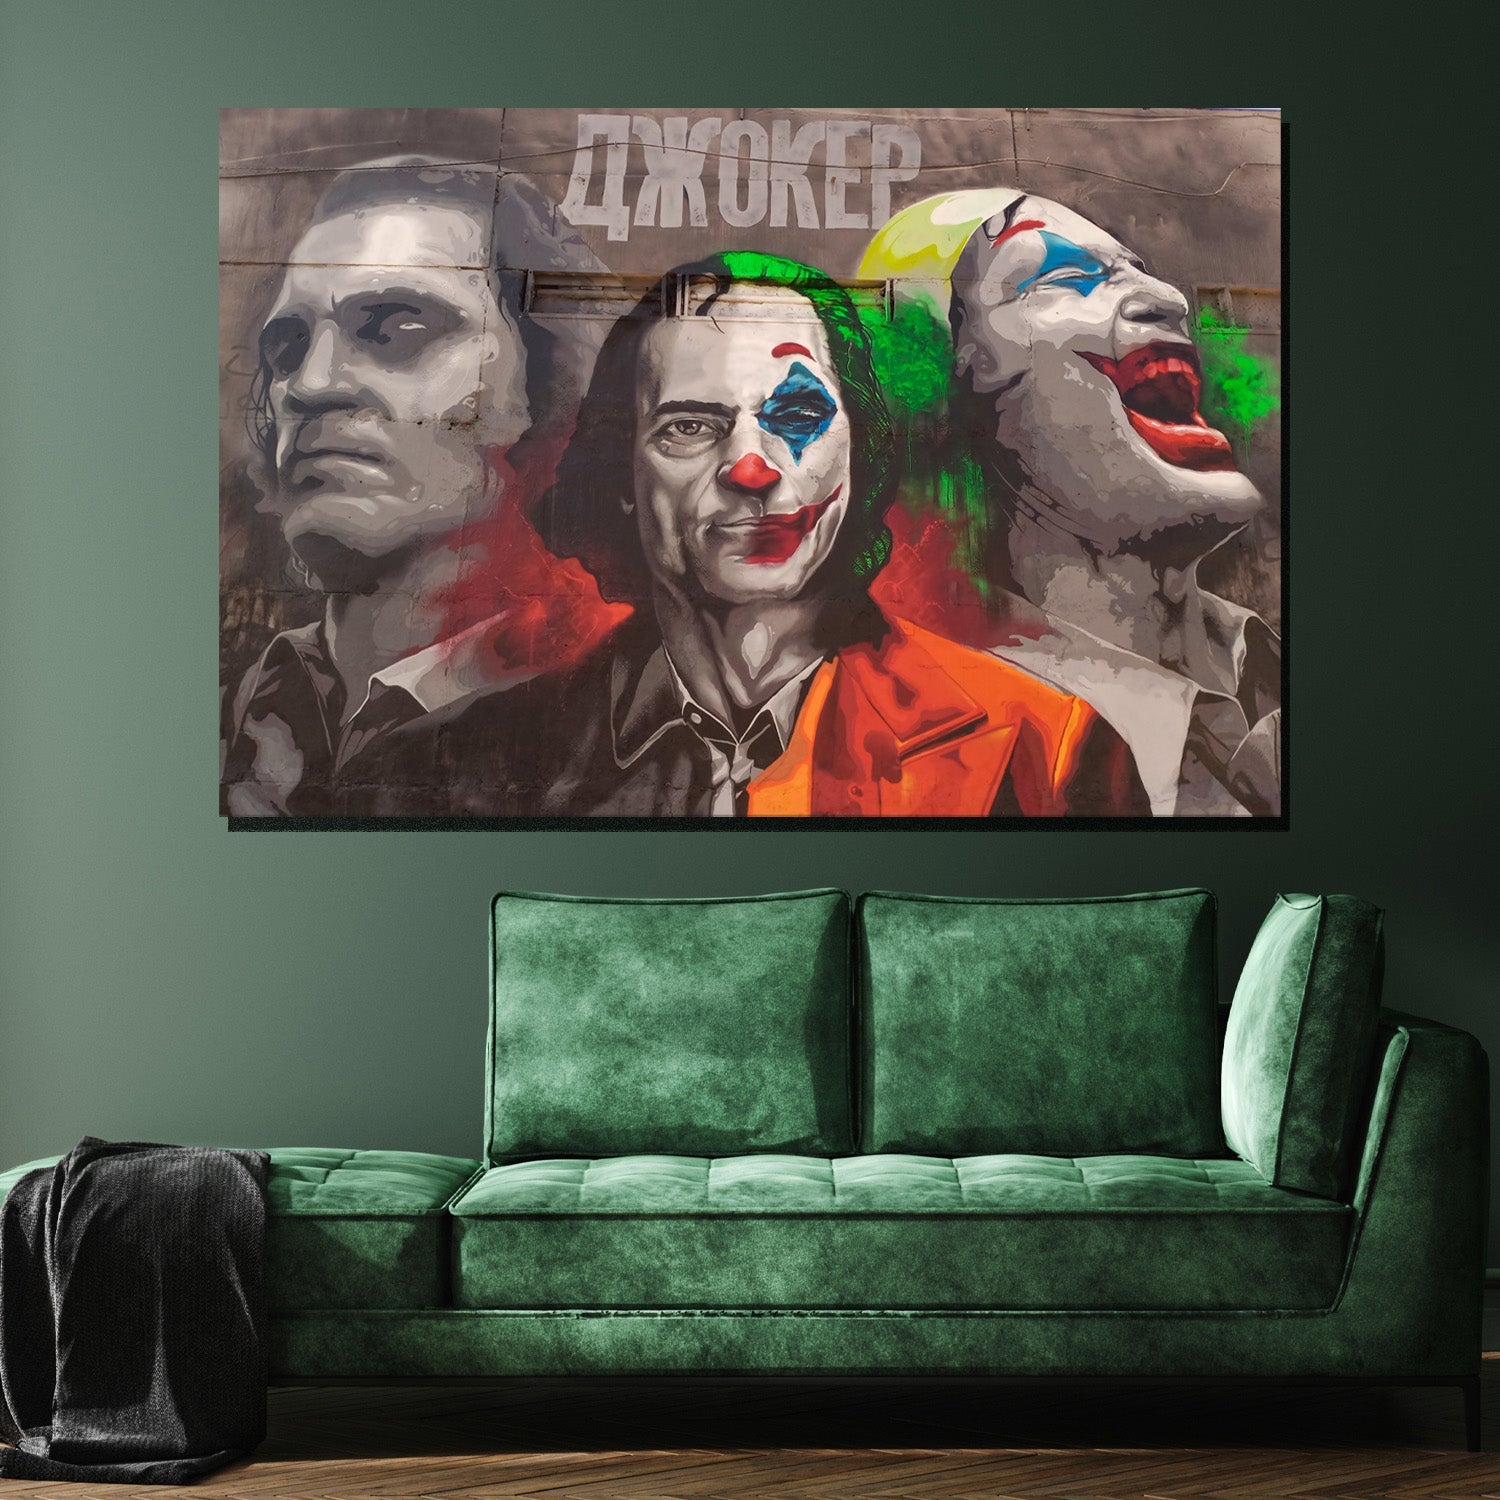 https://cdn.shopify.com/s/files/1/0387/9986/8044/products/TheJokerCanvasArtPrintStretched-3.jpg